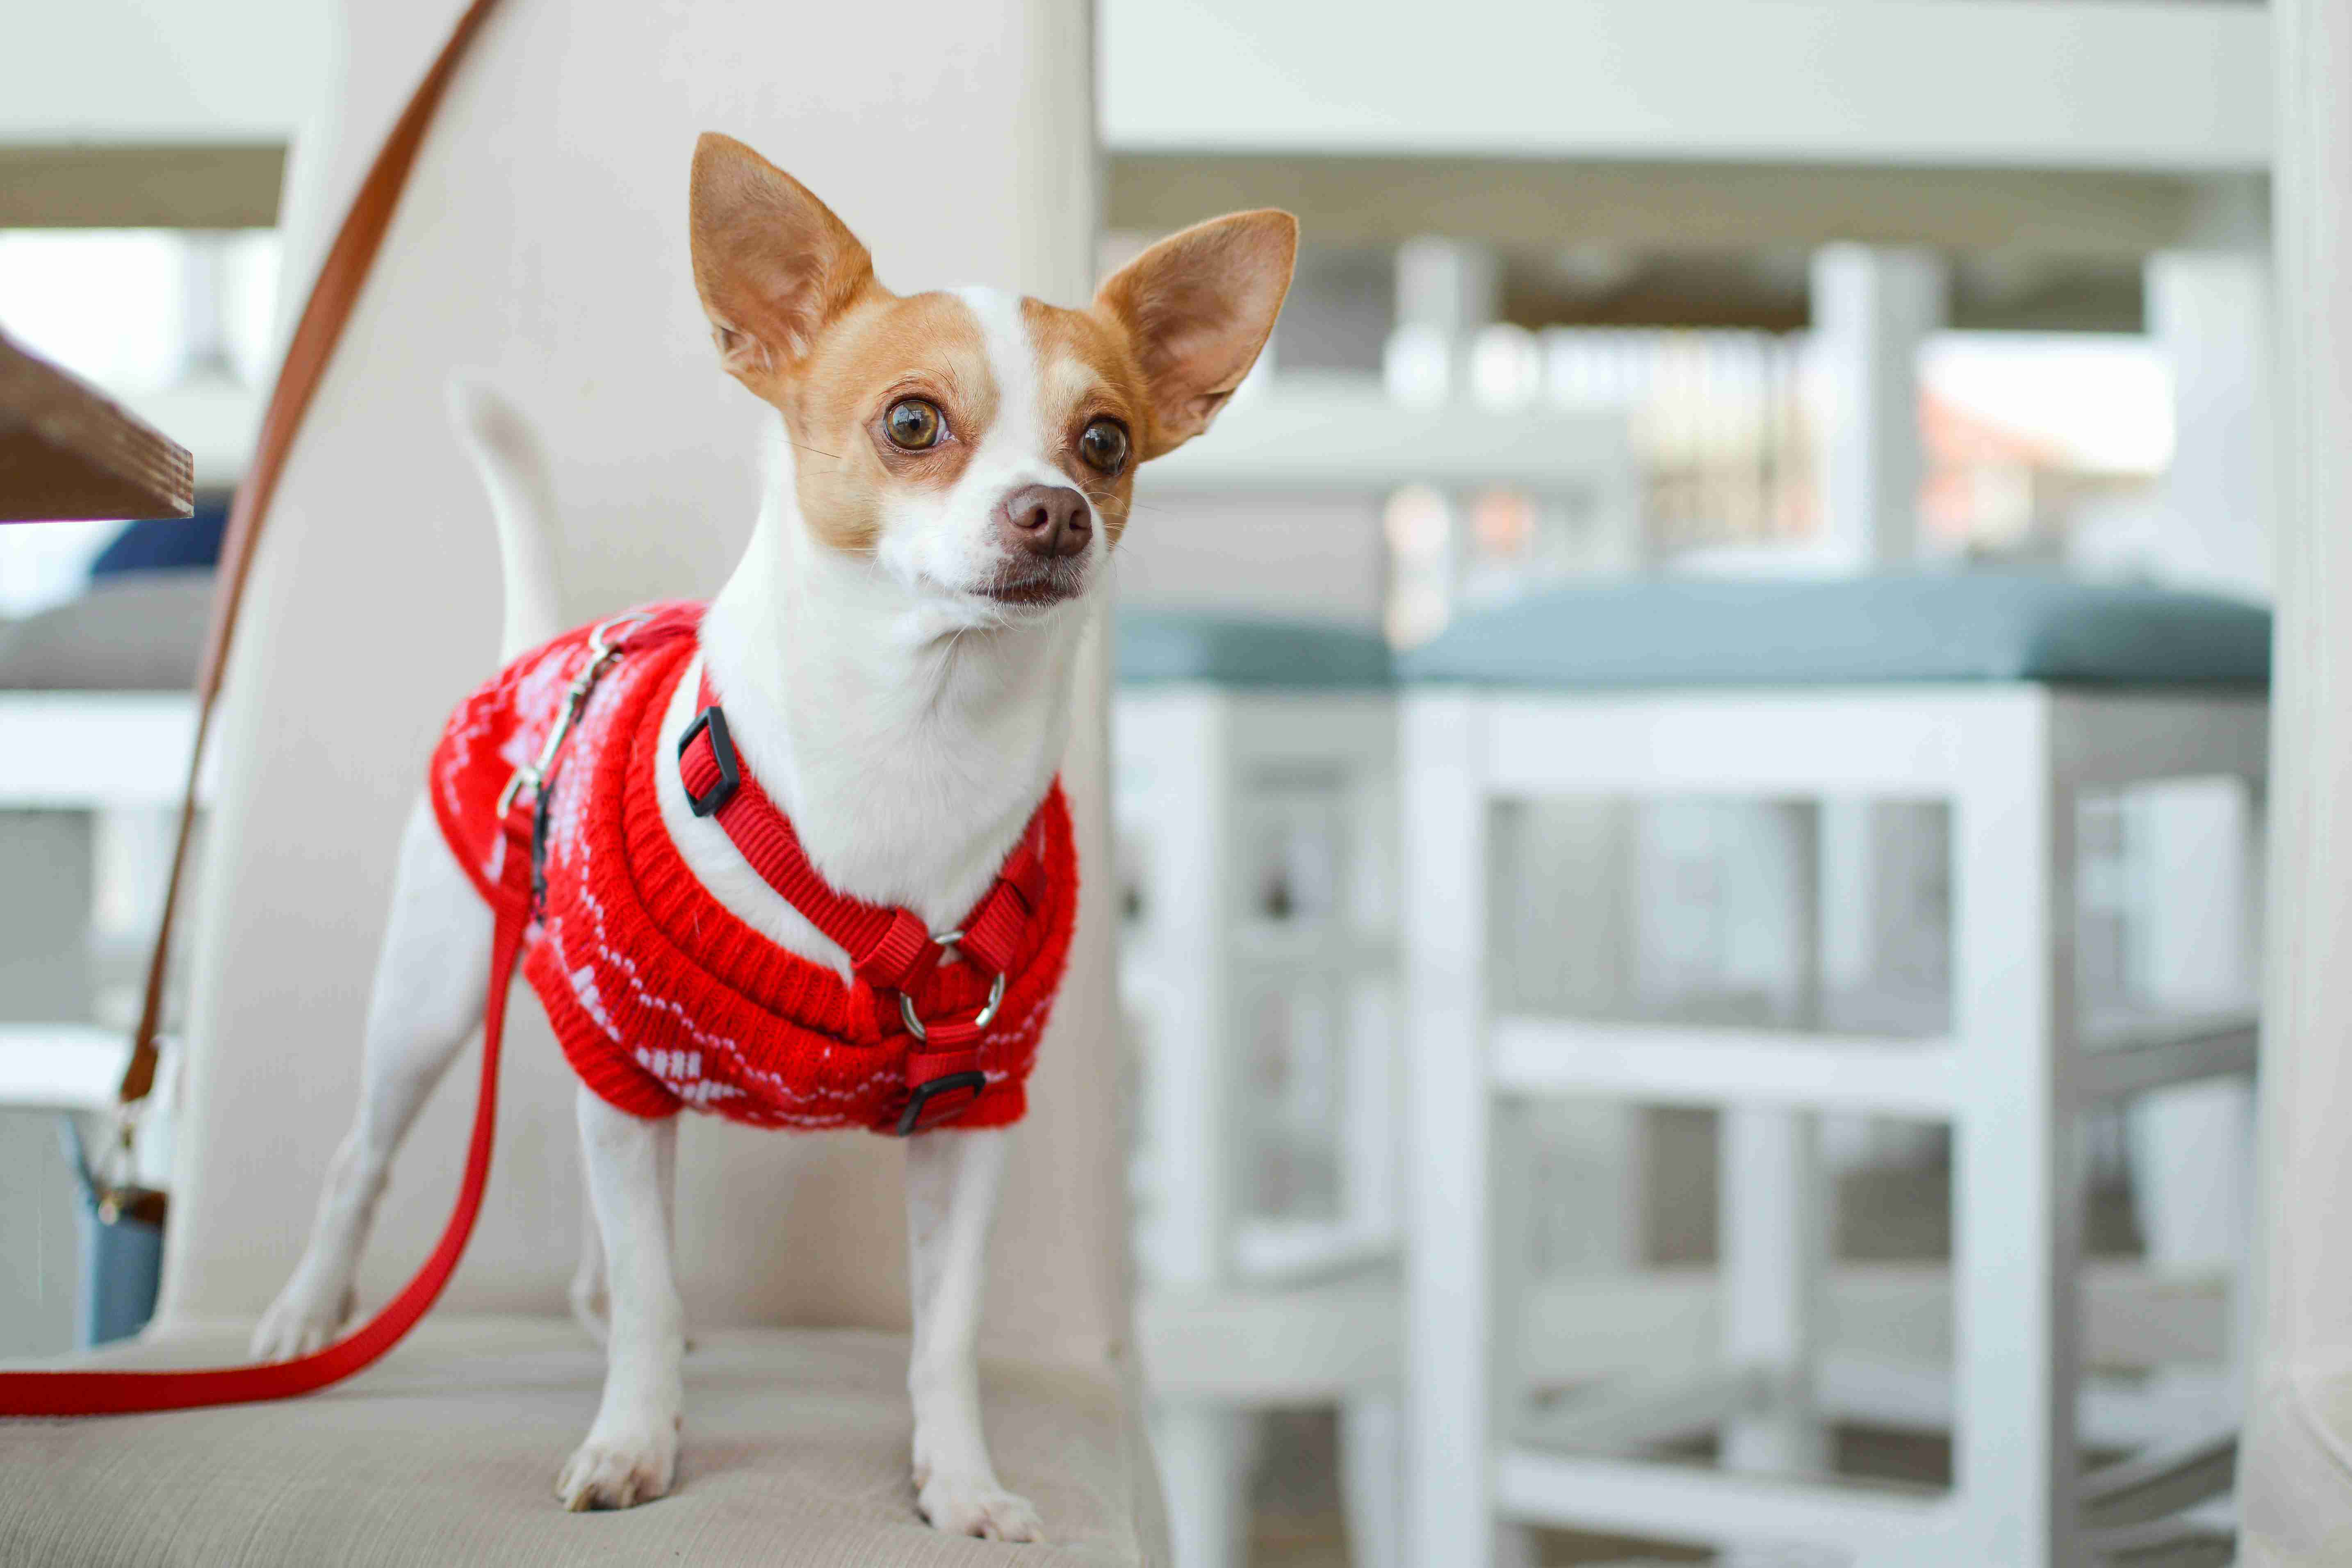 How can you provide a Chihuahua with anger issues with a sense of security and stability?